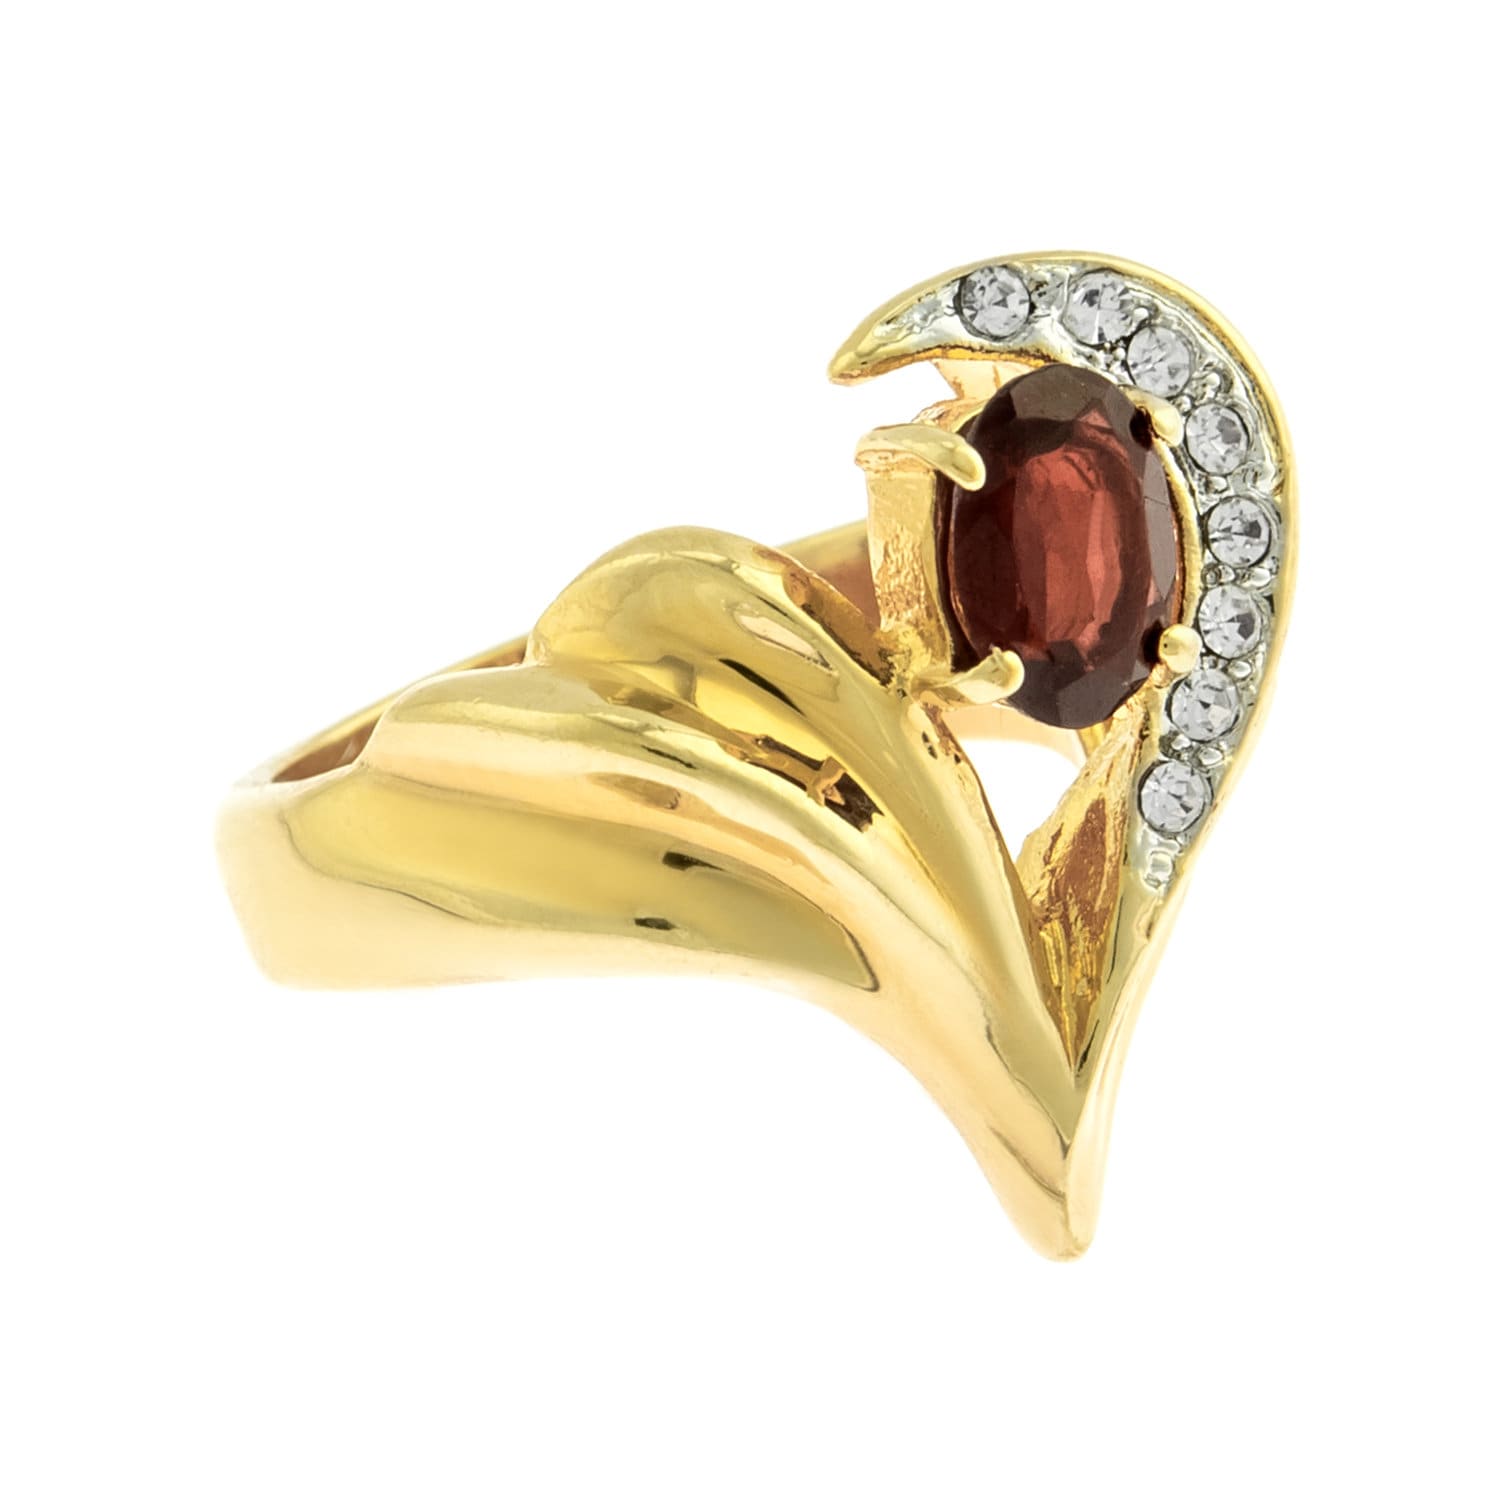 Vintage Ring Genuine Garnet and Clear Swarovski Crystals 18kt Gold Plated Size-7  R2734 - Limited Stock - Never Worn